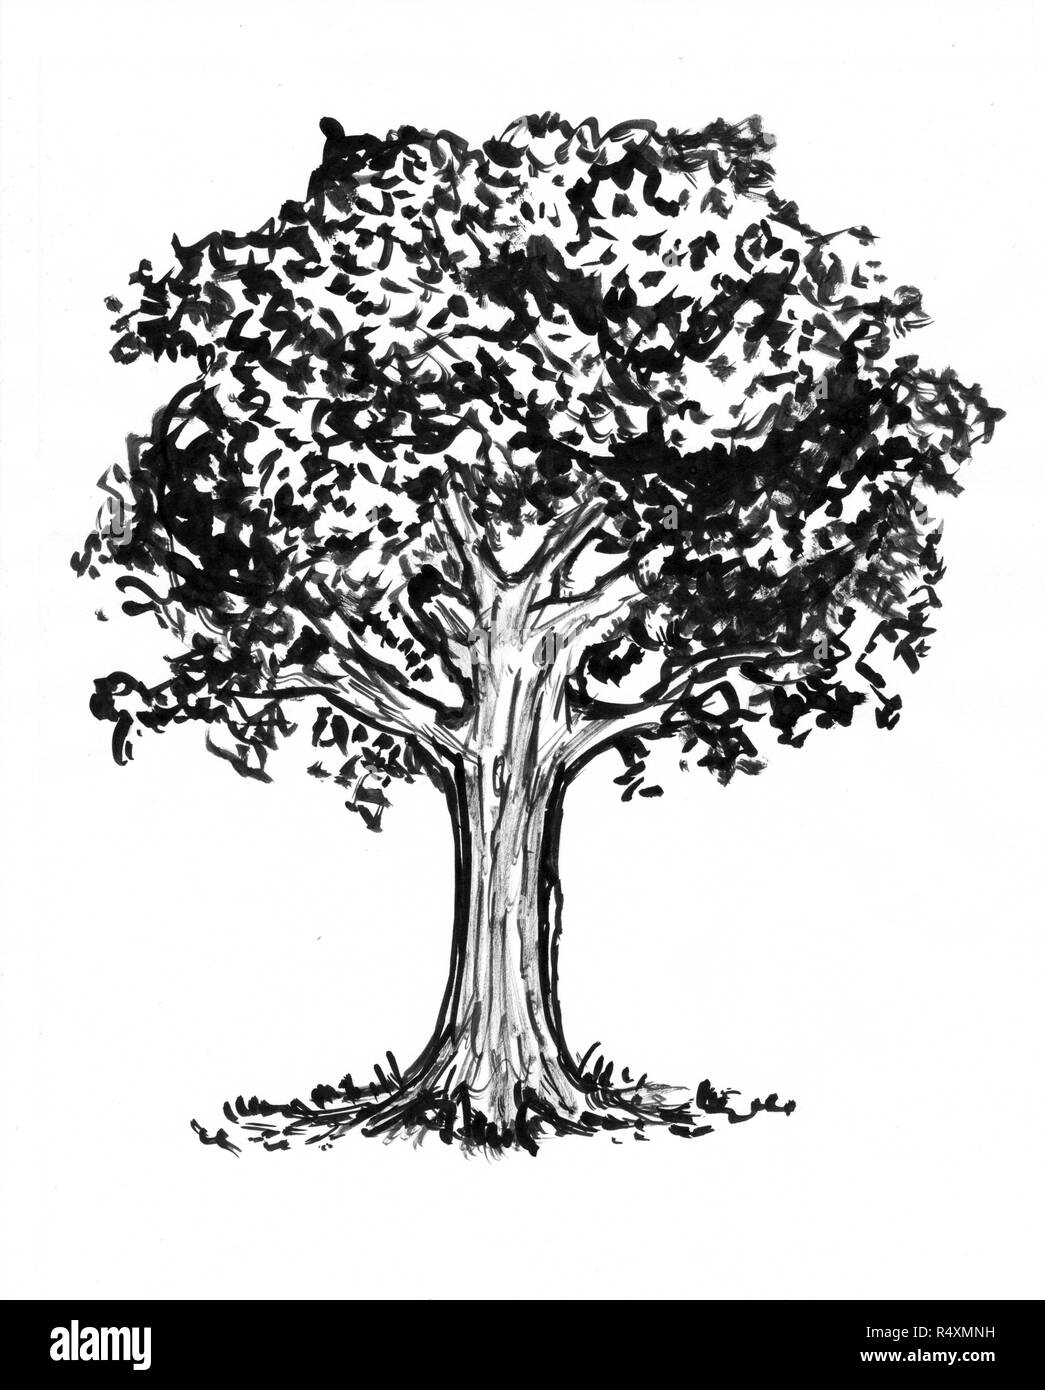 Black Ink Hand Drawing of Tree Stock Photo